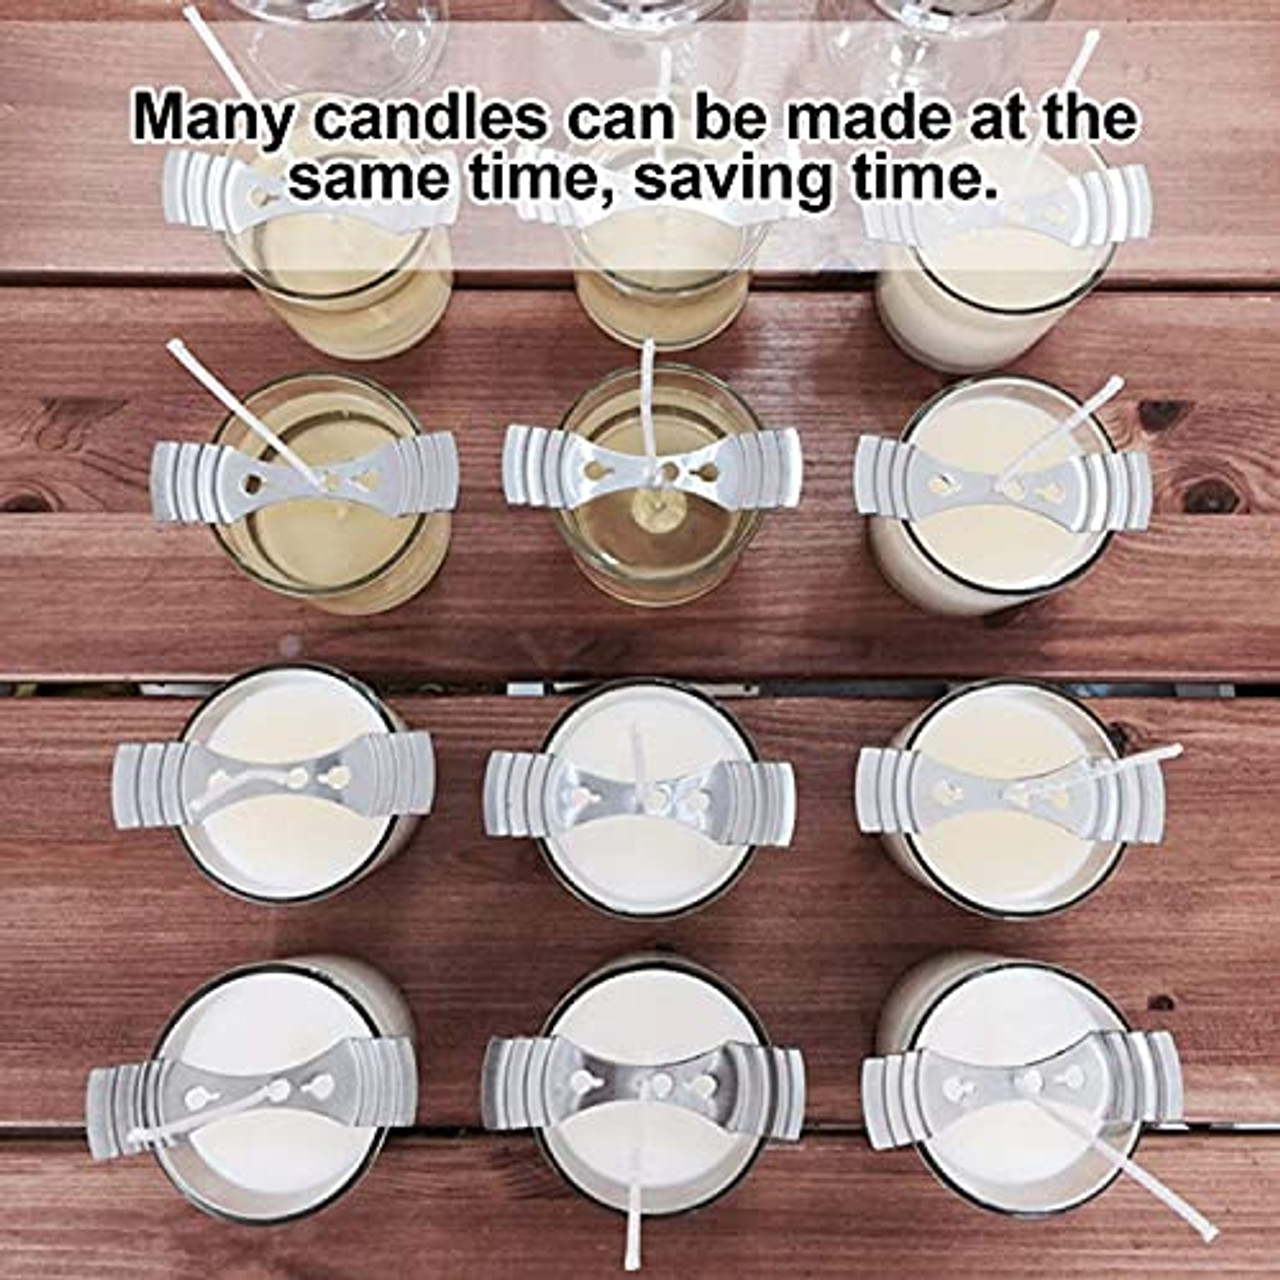  20pcs Metal Candle Wick Holders, Upgraded Candle Wick Centering  Devices, Silver Stainless Steel Candle Wick Holder for Candle Making : Home  & Kitchen